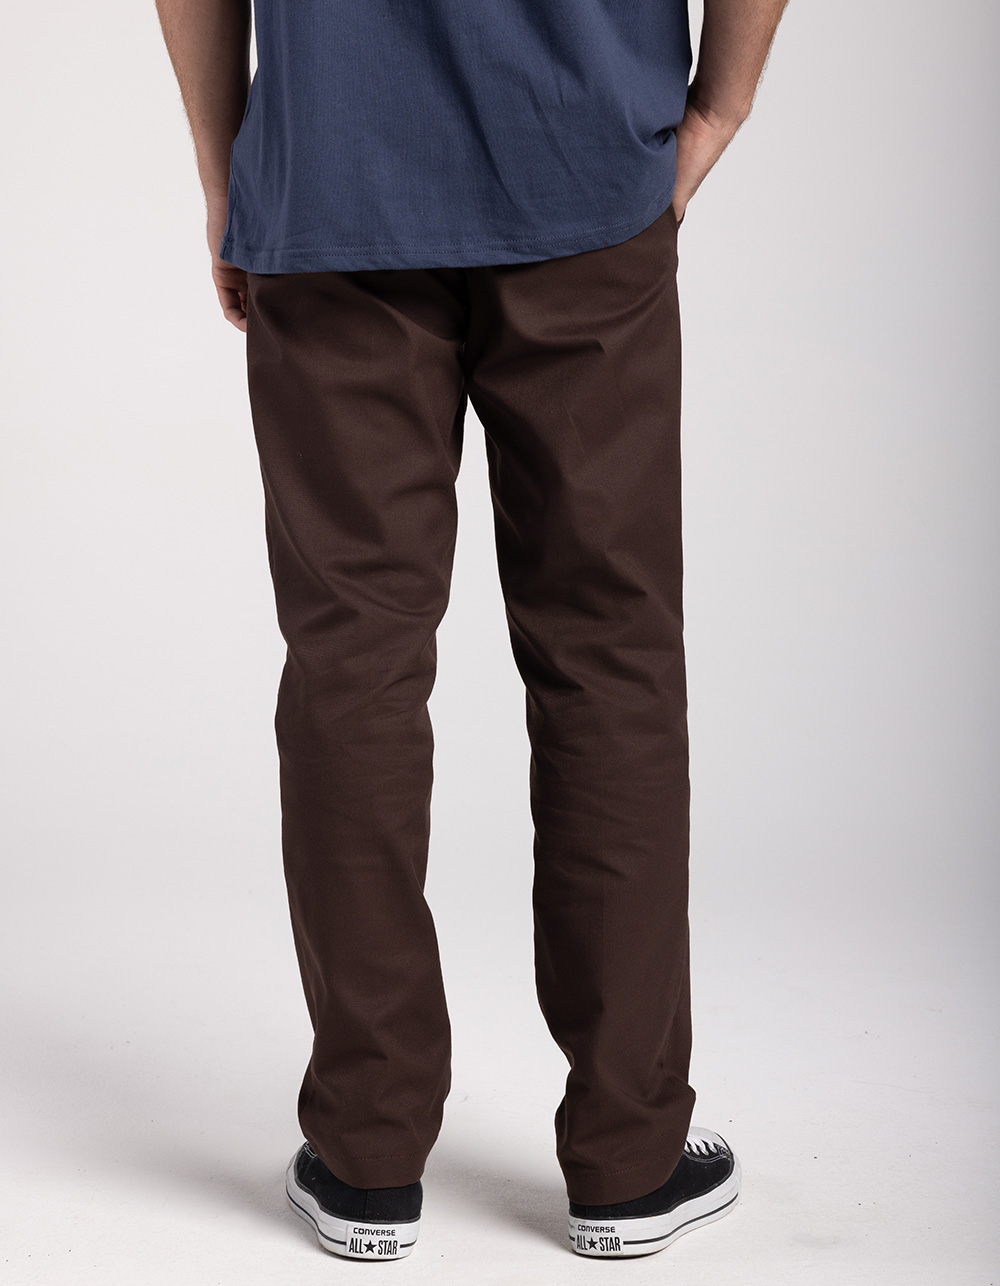 Discover more than 75 light brown dickies pants best - in.eteachers